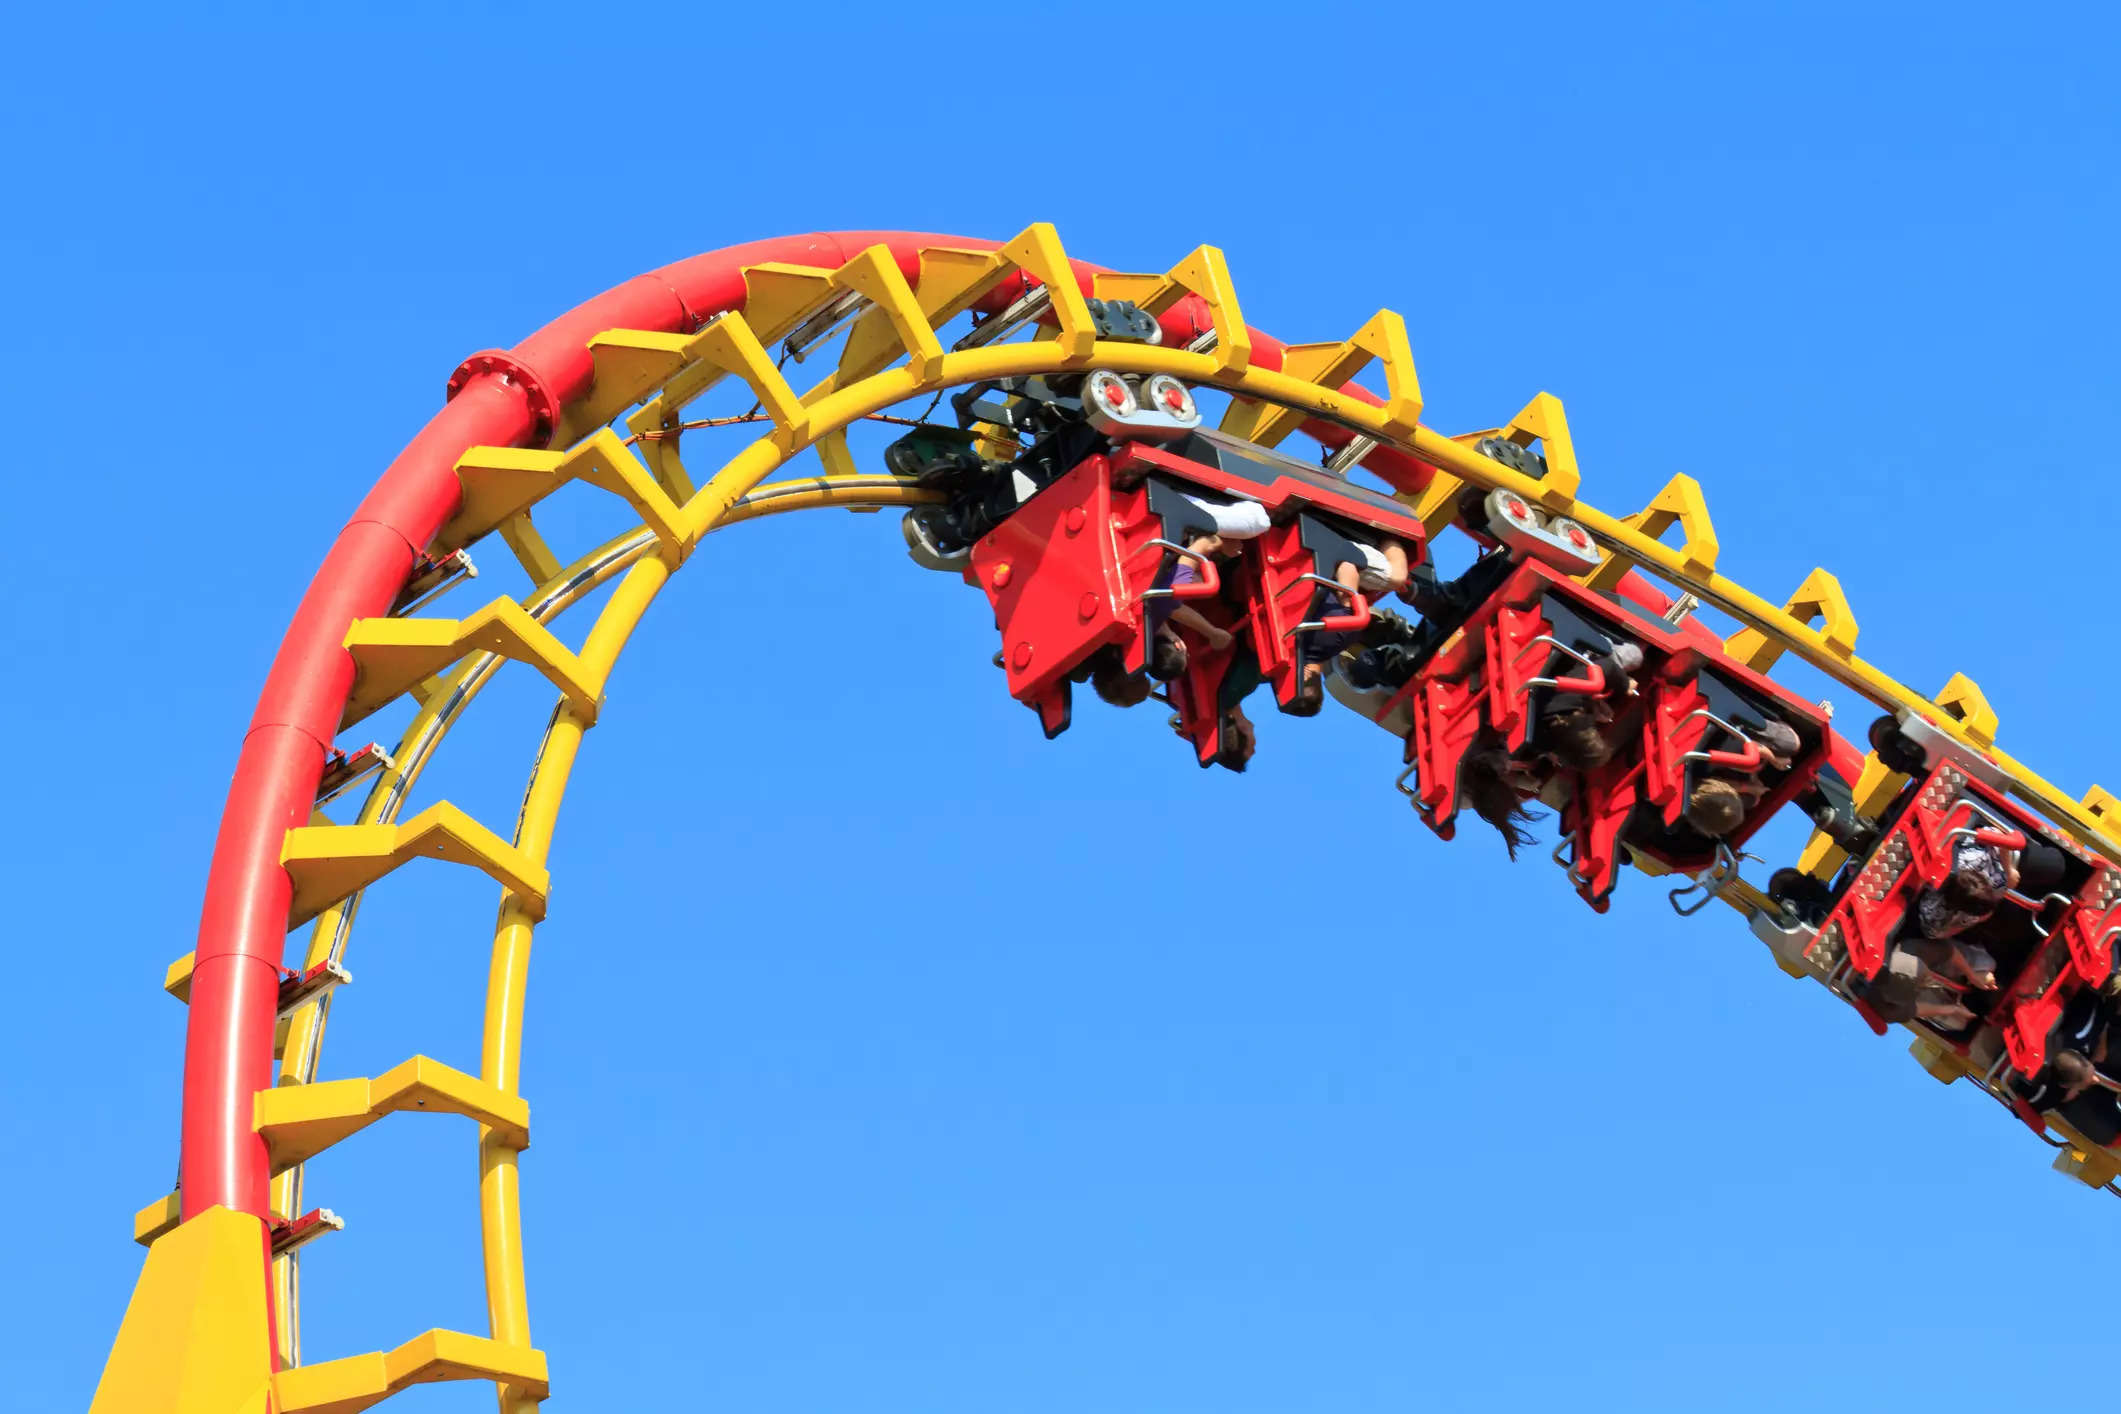 Rollercoaster gets stuck mid-ride, riders left hanging upside down for 45 minutes